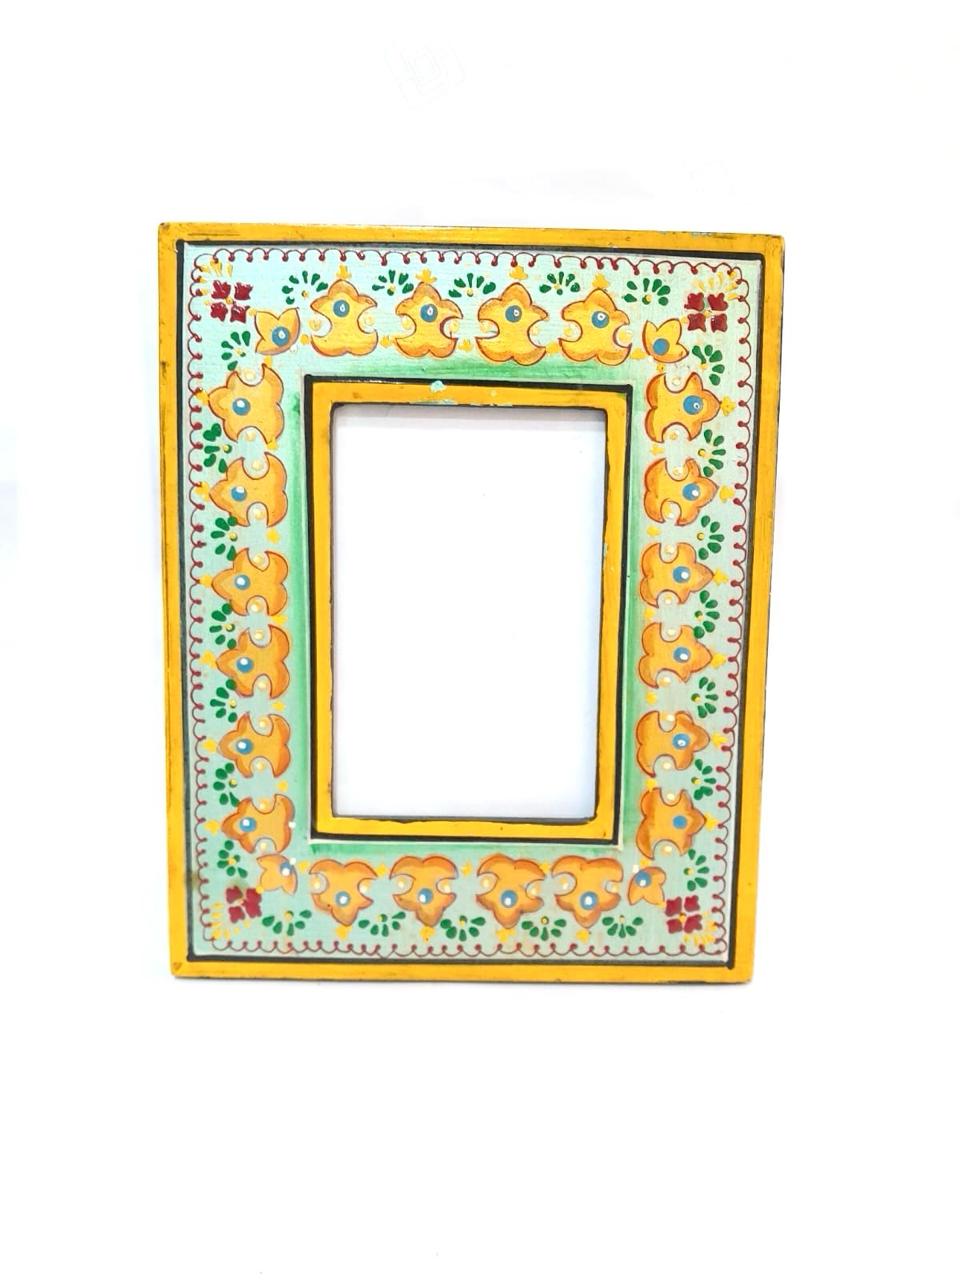 Floral Photo Frame Wooden Store Phots And Display Exclusive Artware By Tamrapatra